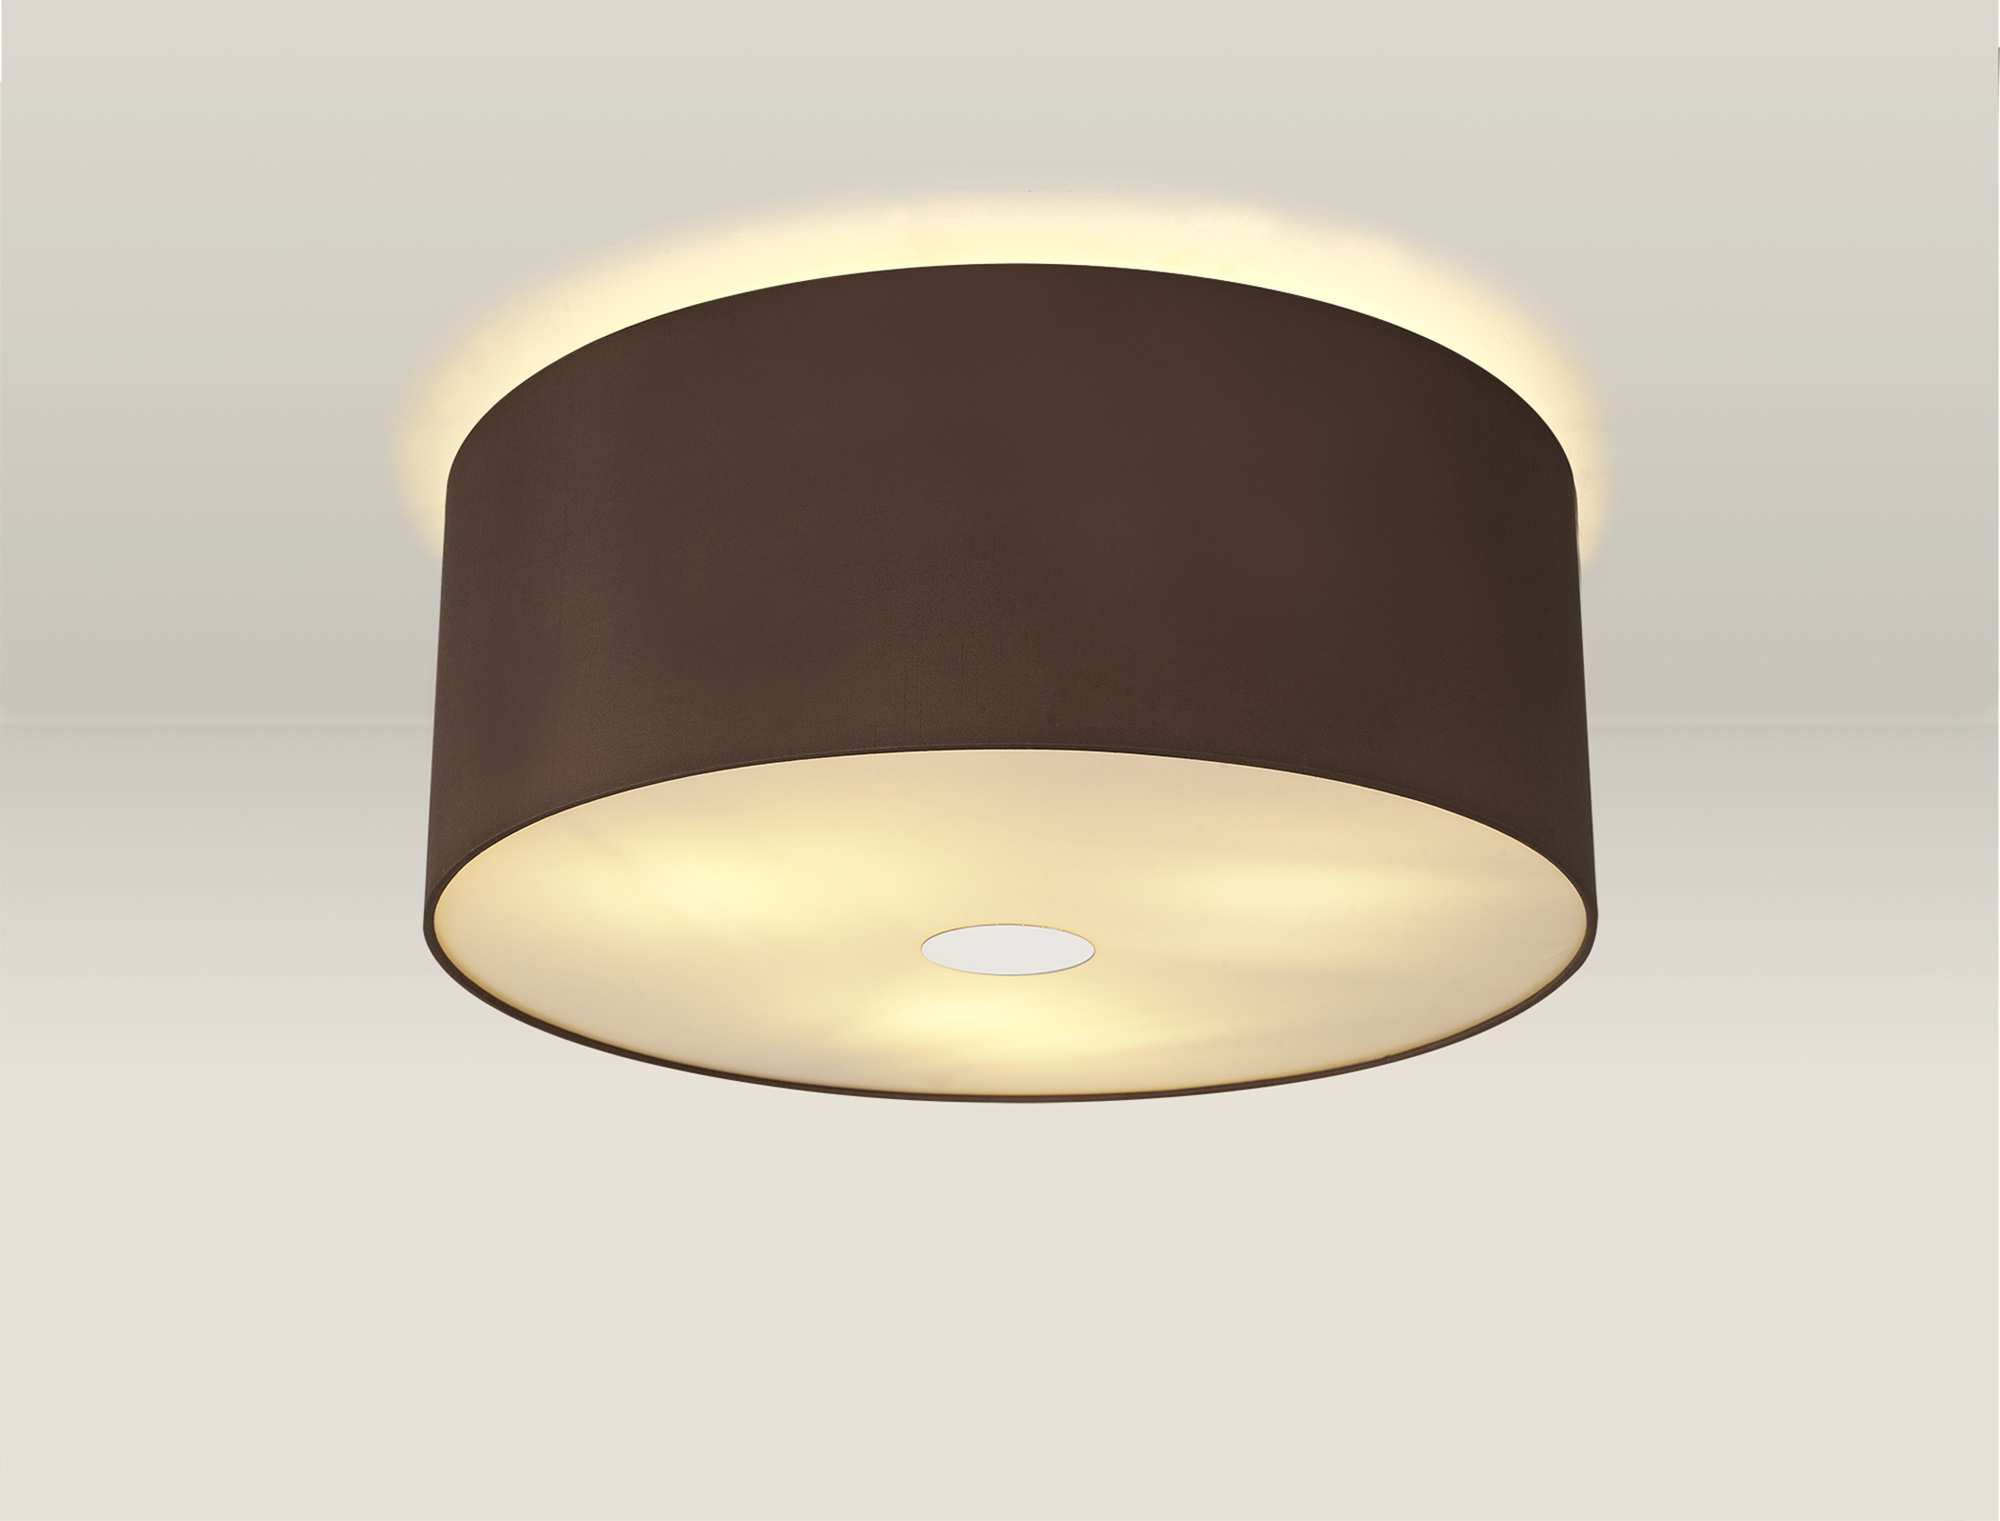 Baymont 50cm; Flush 3 Light Polished Chrome; Raw Cocoa/Grecian Bronze; Frosted Diffuser DK0362  Deco Baymont CH RC